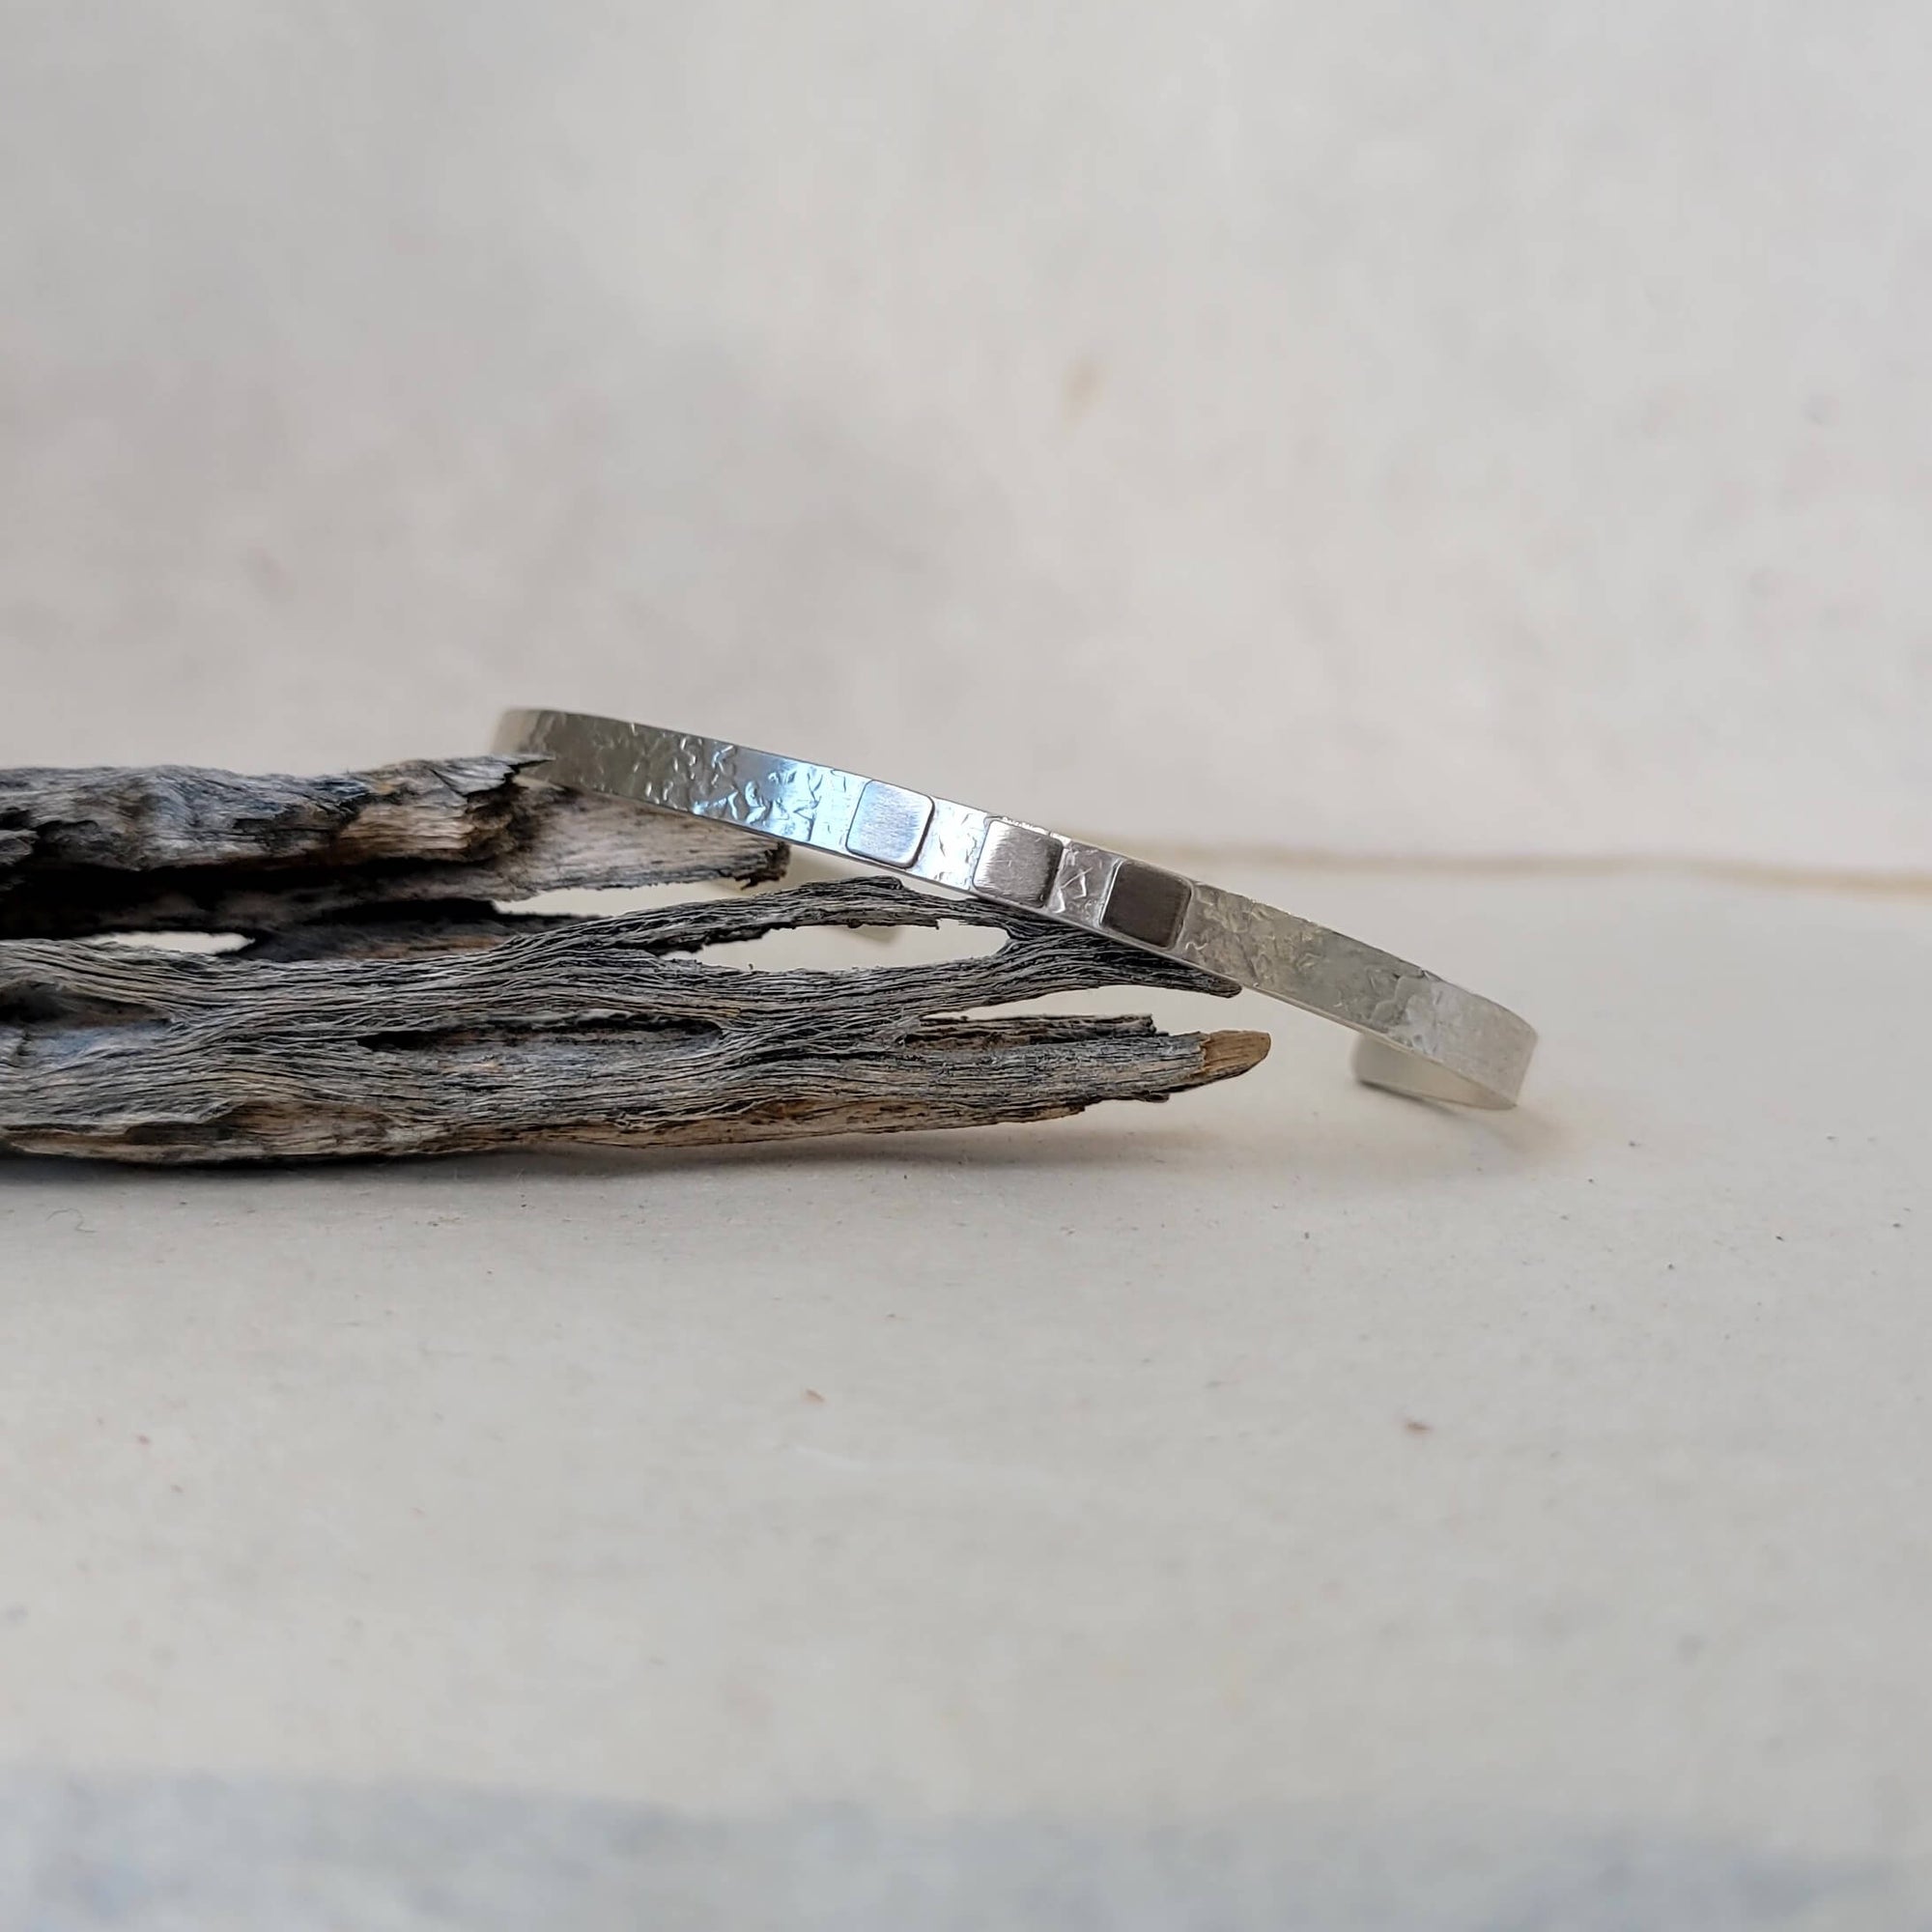 Handmade cuff bracelet made with recycled sterling silver and palladium.